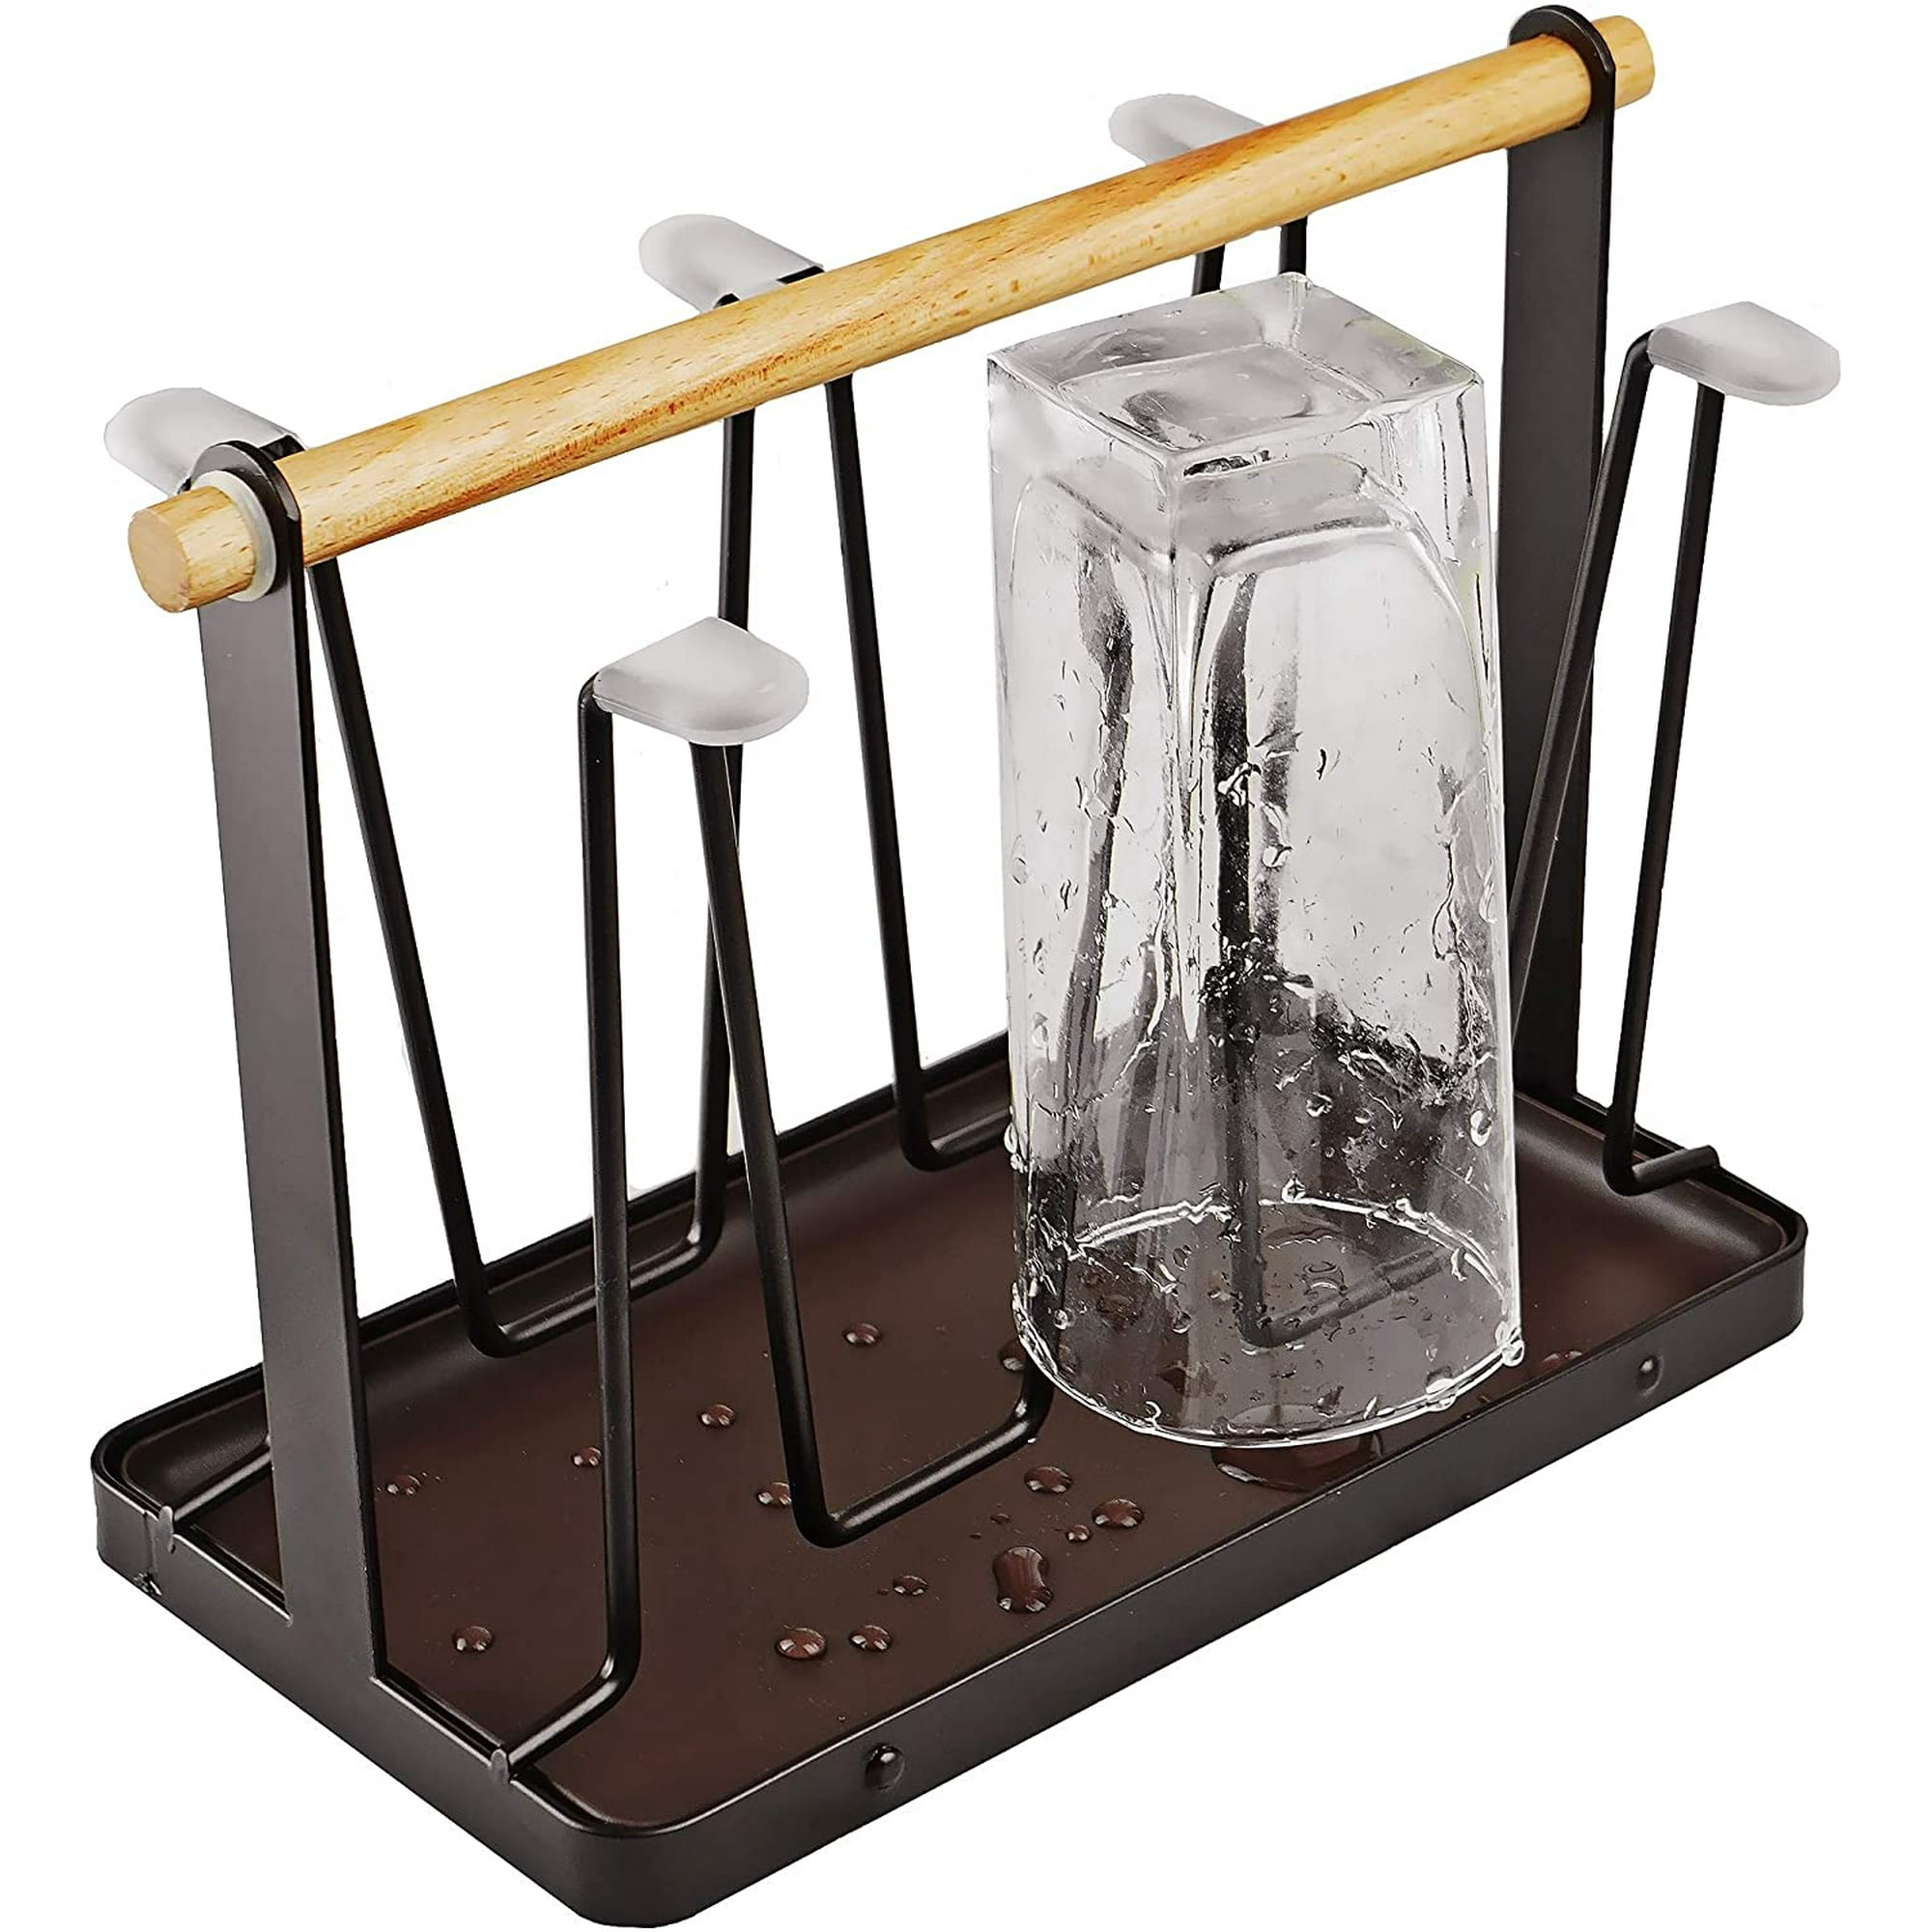 Drain Tray, Metal Organizer Wood Handle Cup Drying Rack Stand –